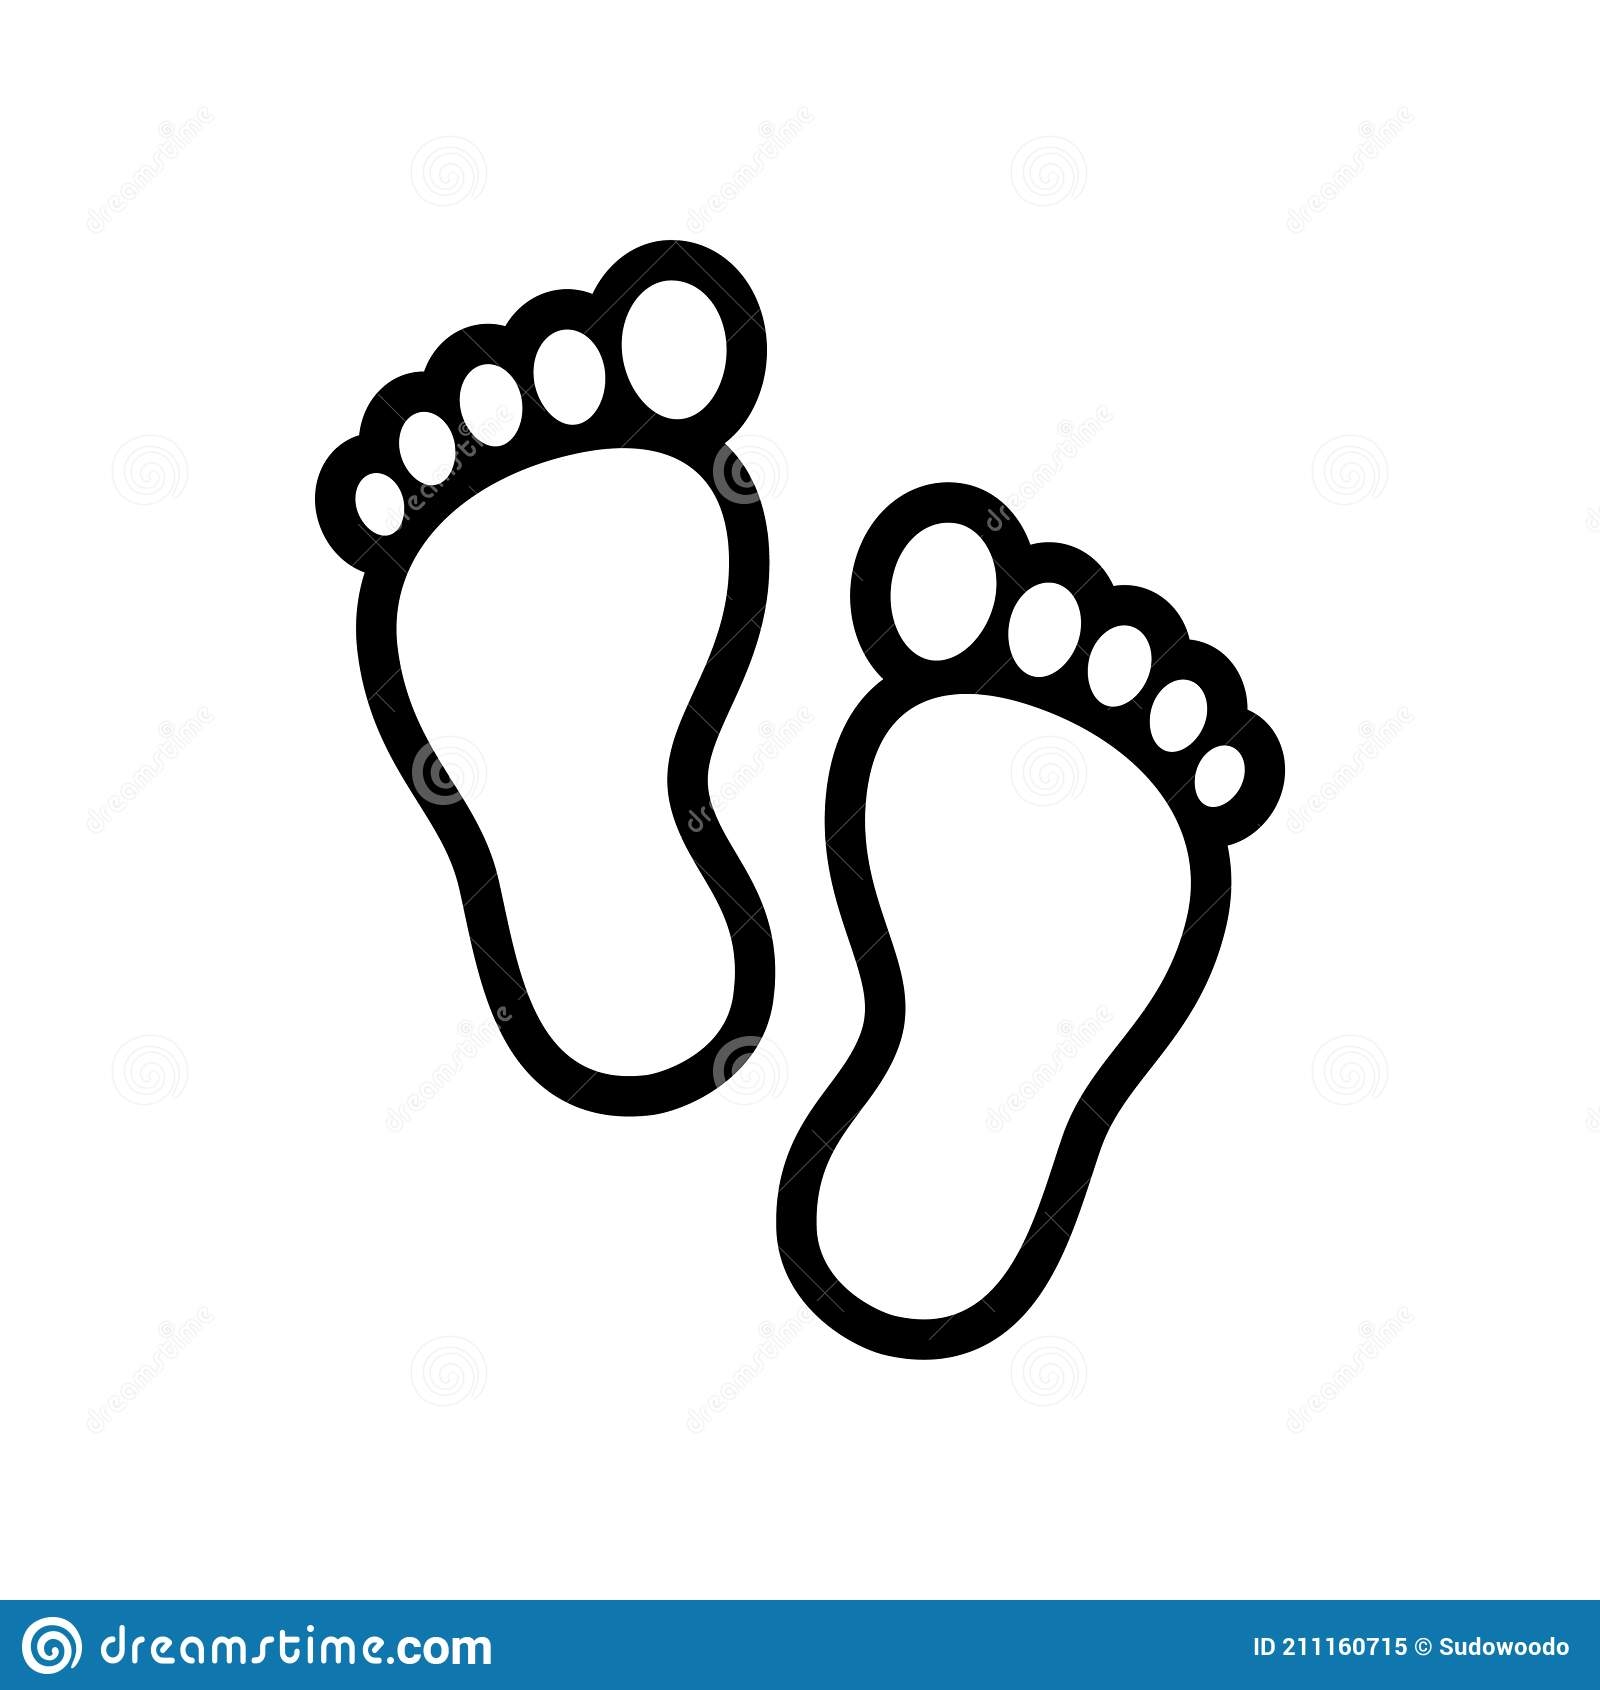 Footprint Outline Icon Stock Vector Illustration Of Print 211160715